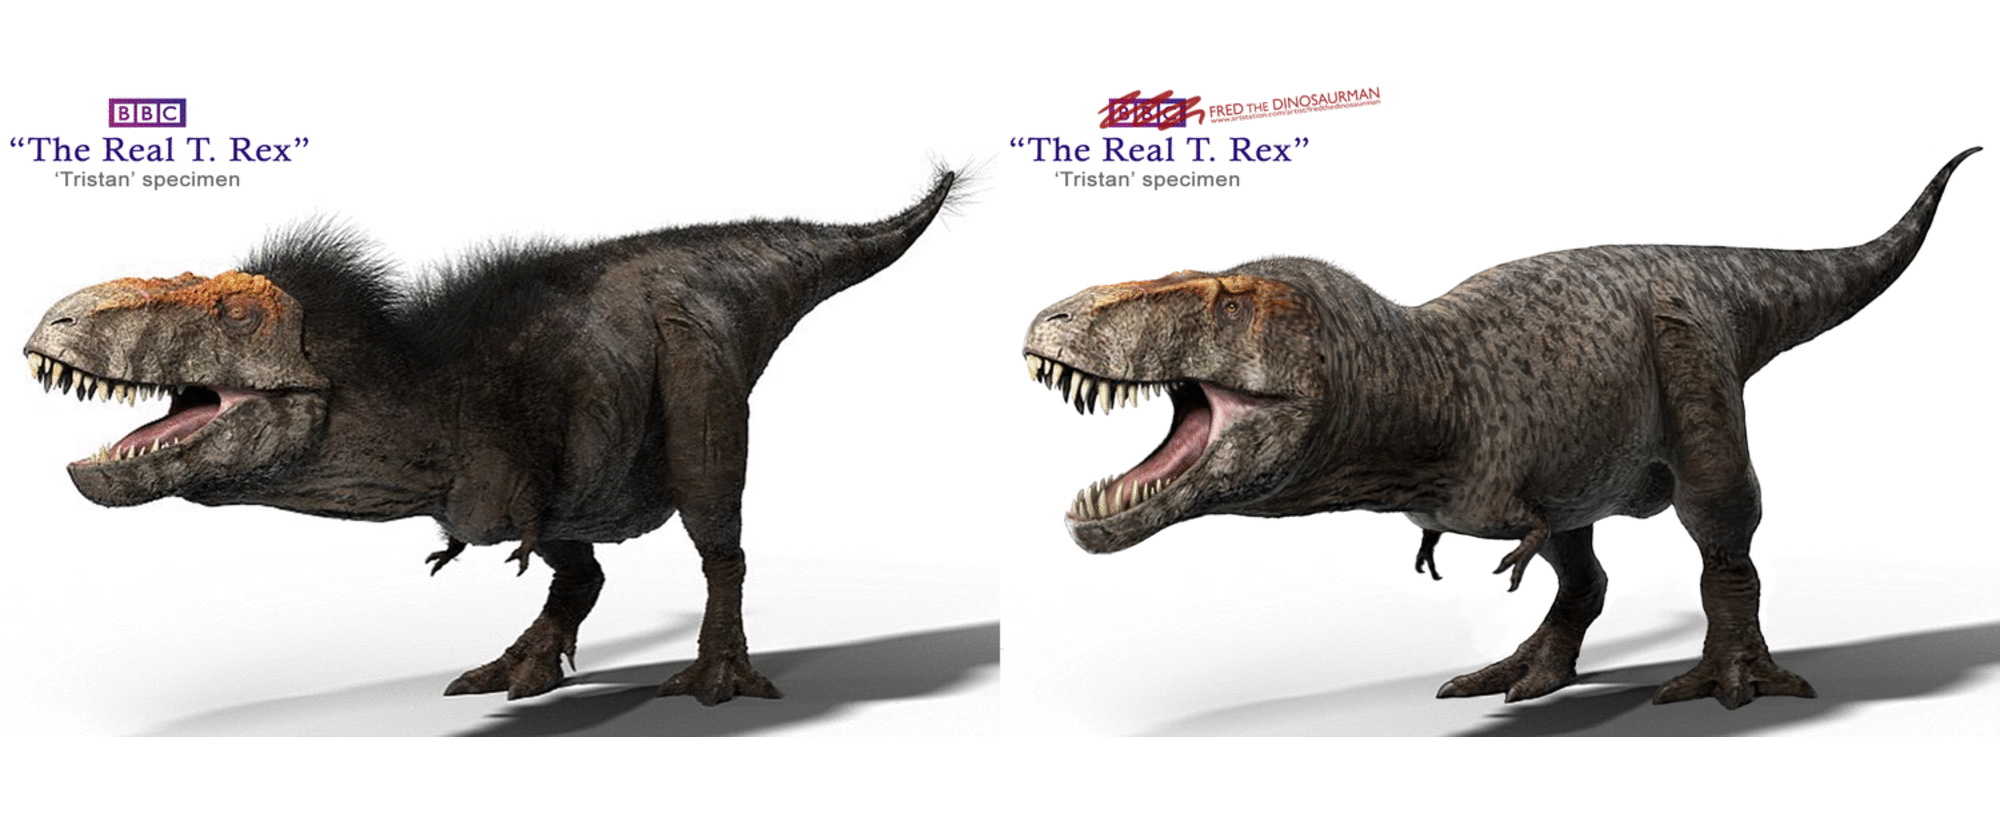 how you think t rex look like? 